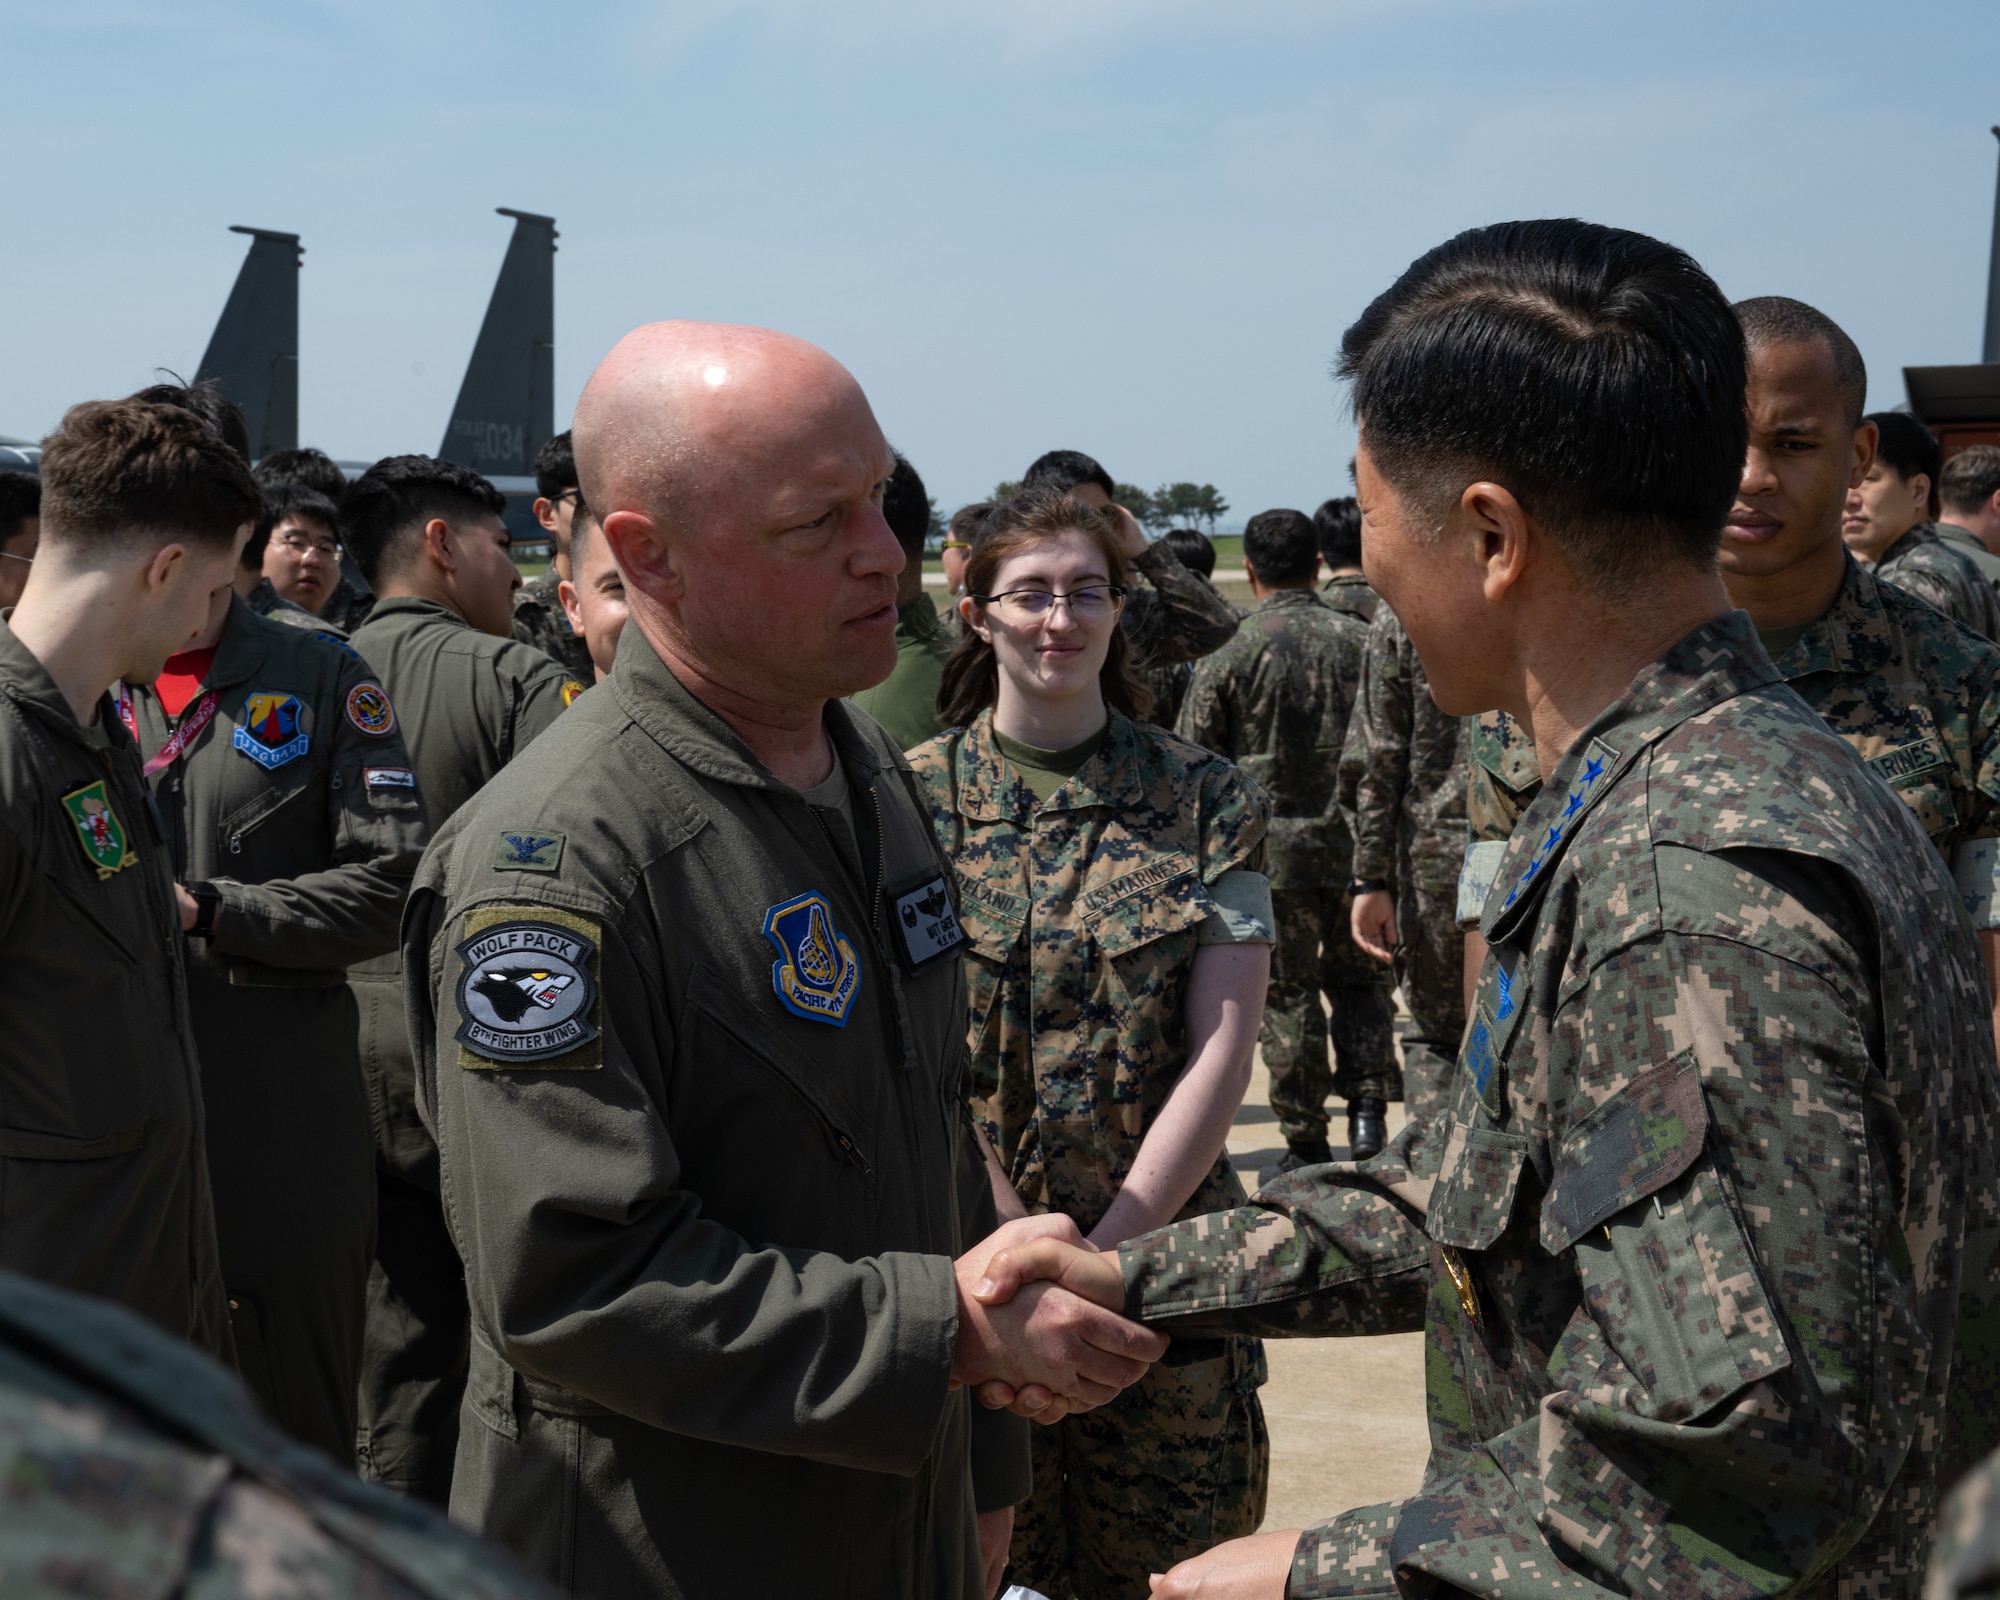 U.S. Air Force Col. Matthew Gaetke, 8th Fighter Wing commander (left), and Republic of Korea Air Force Chief of Staff Gen. Lee, Young Su (right) say their goodbyes after a visit at Kunsan Air Base, ROK